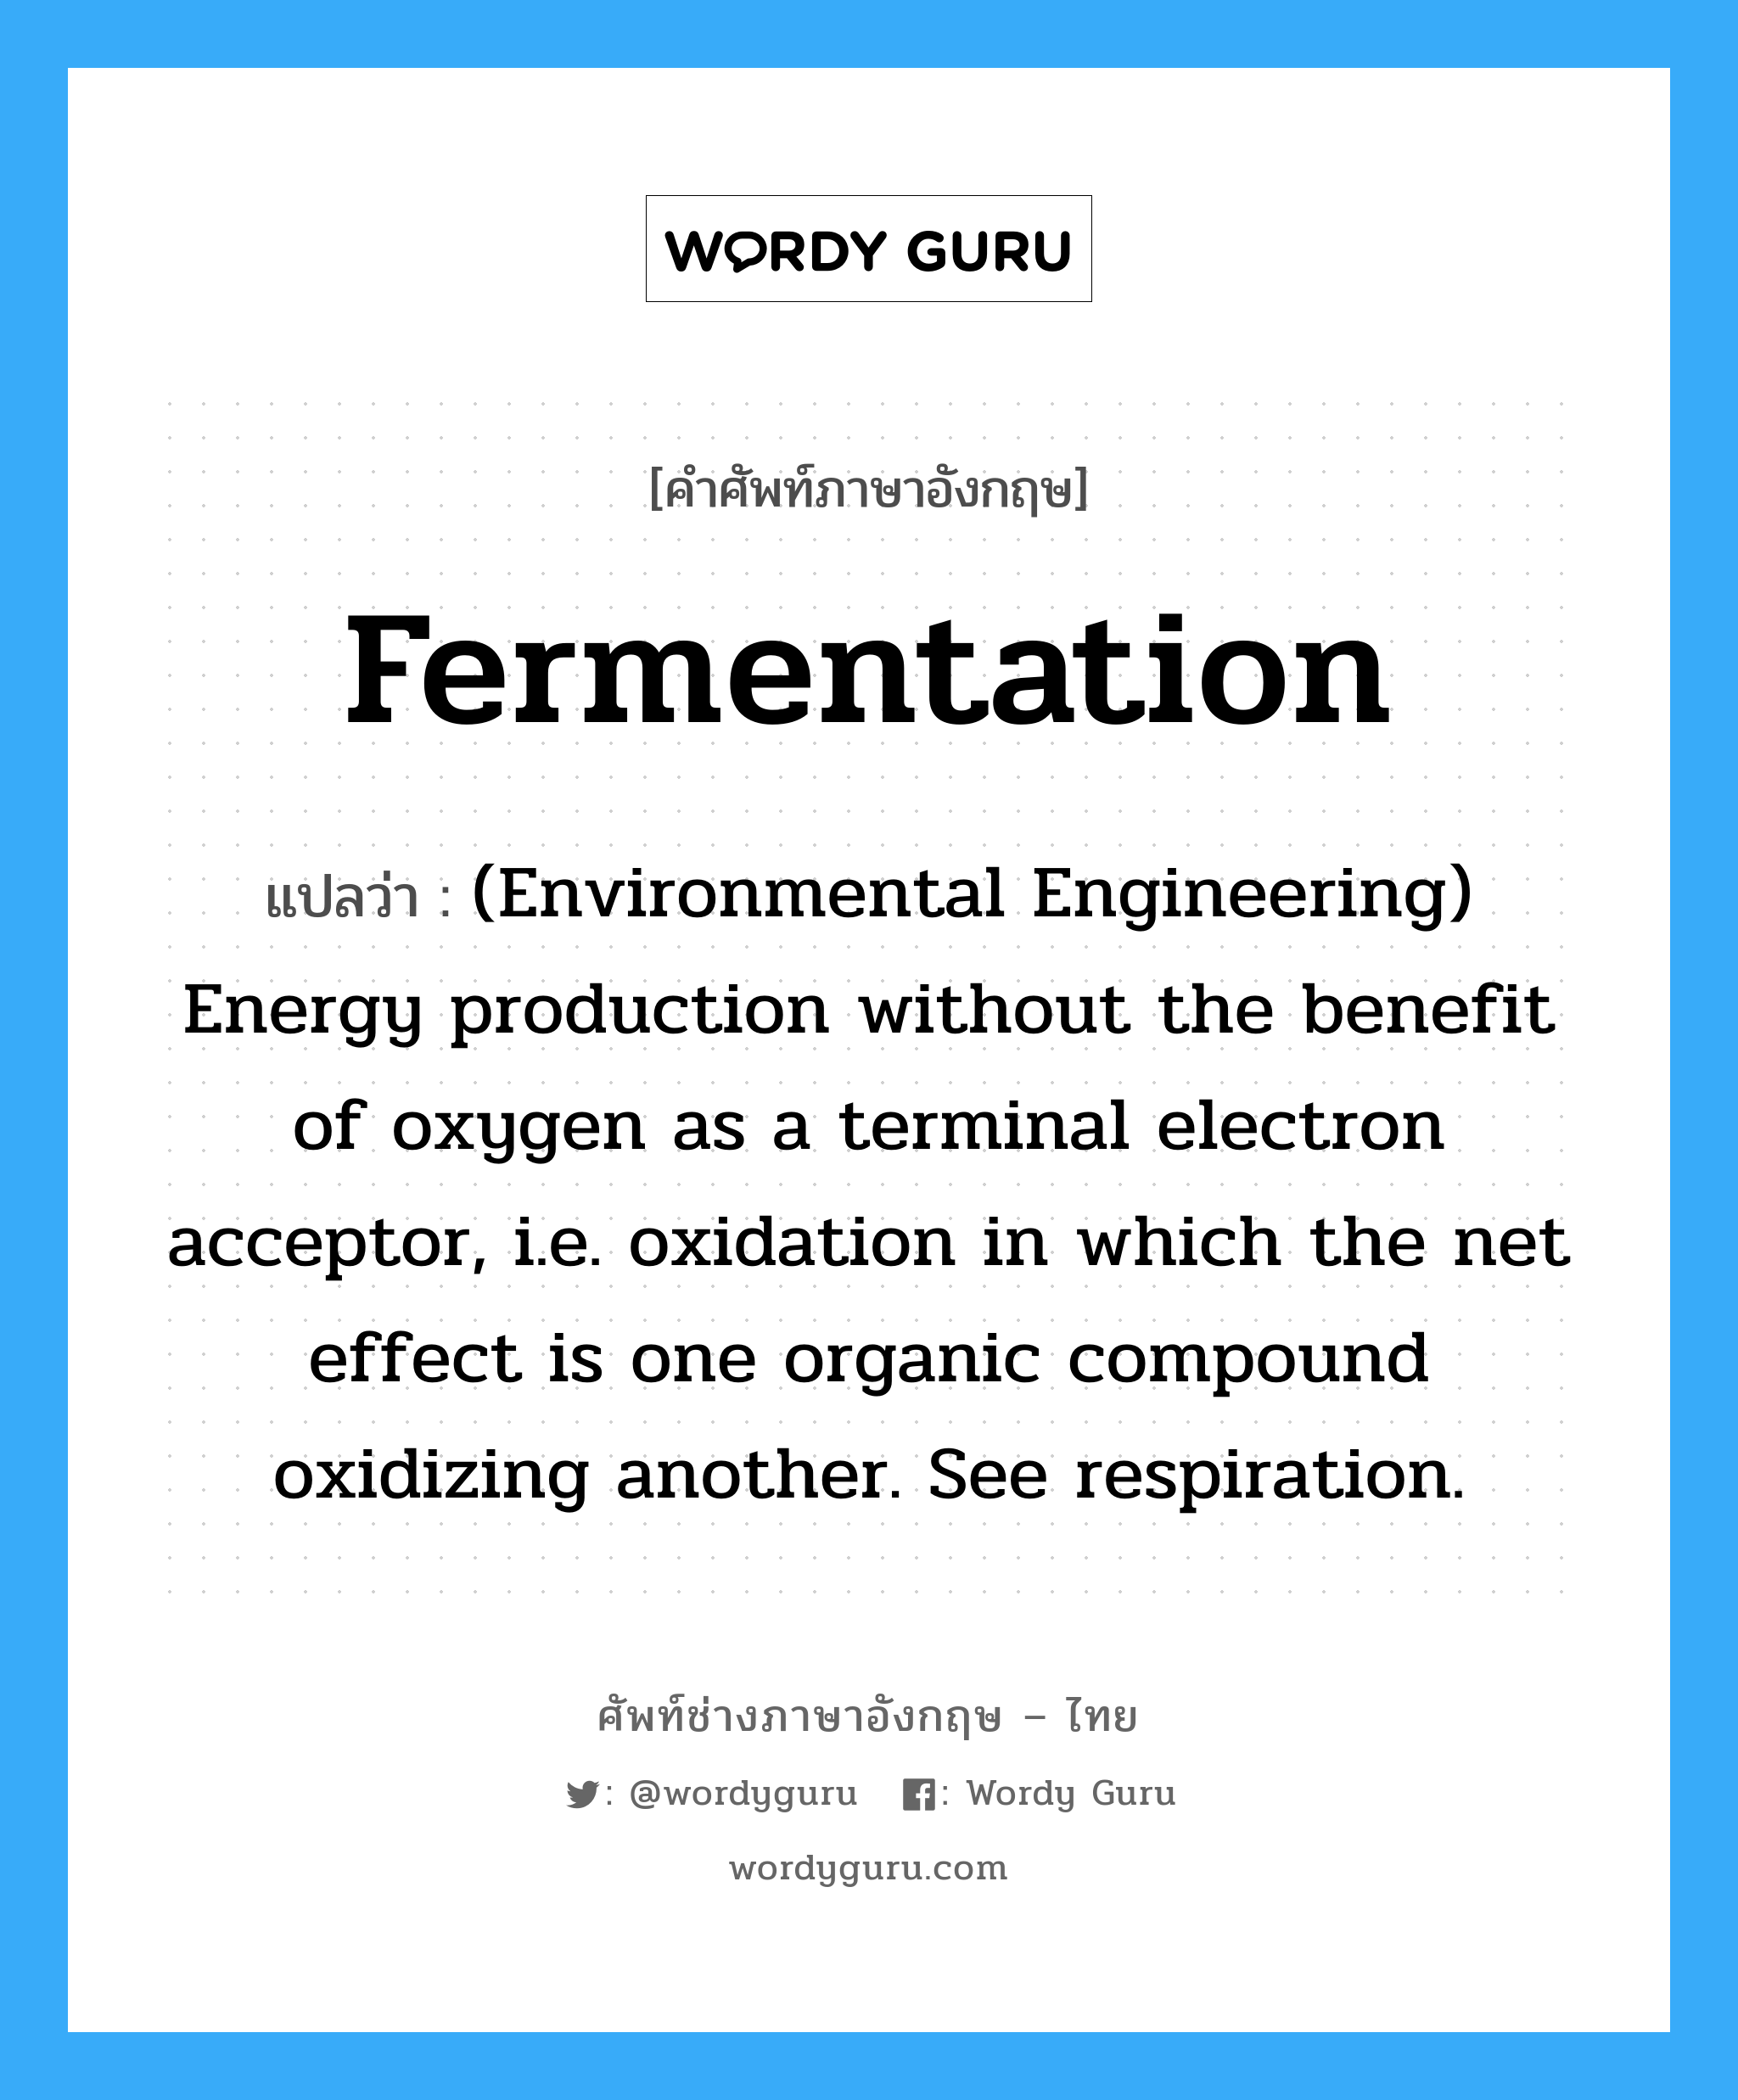 Fermentation แปลว่า?, คำศัพท์ช่างภาษาอังกฤษ - ไทย Fermentation คำศัพท์ภาษาอังกฤษ Fermentation แปลว่า (Environmental Engineering) Energy production without the benefit of oxygen as a terminal electron acceptor, i.e. oxidation in which the net effect is one organic compound oxidizing another. See respiration.